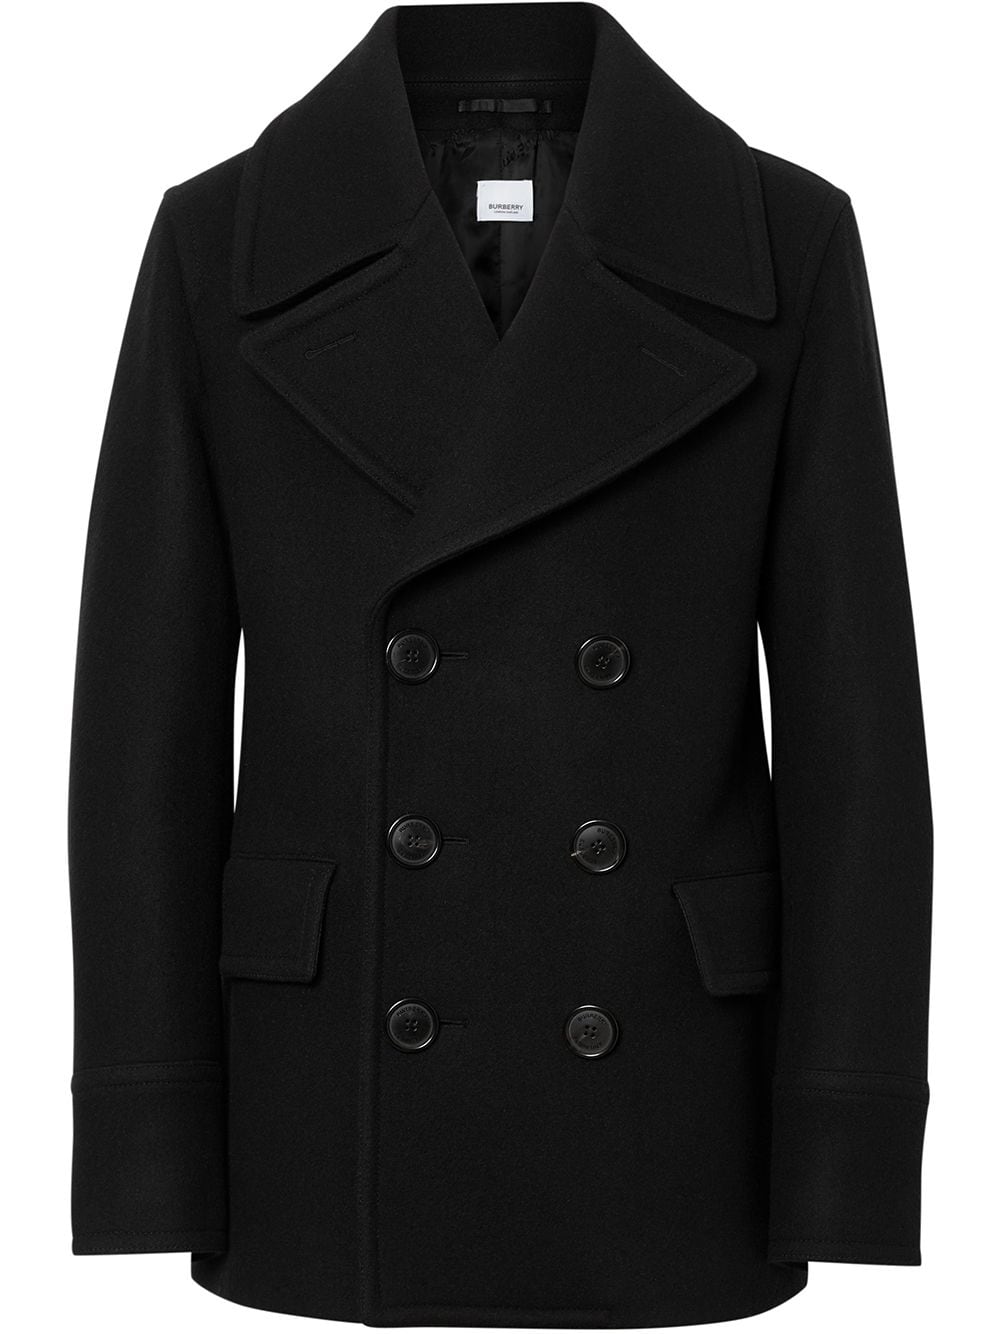 Shop Burberry Wool Blend Pea Coat with Express Delivery - FARFETCH